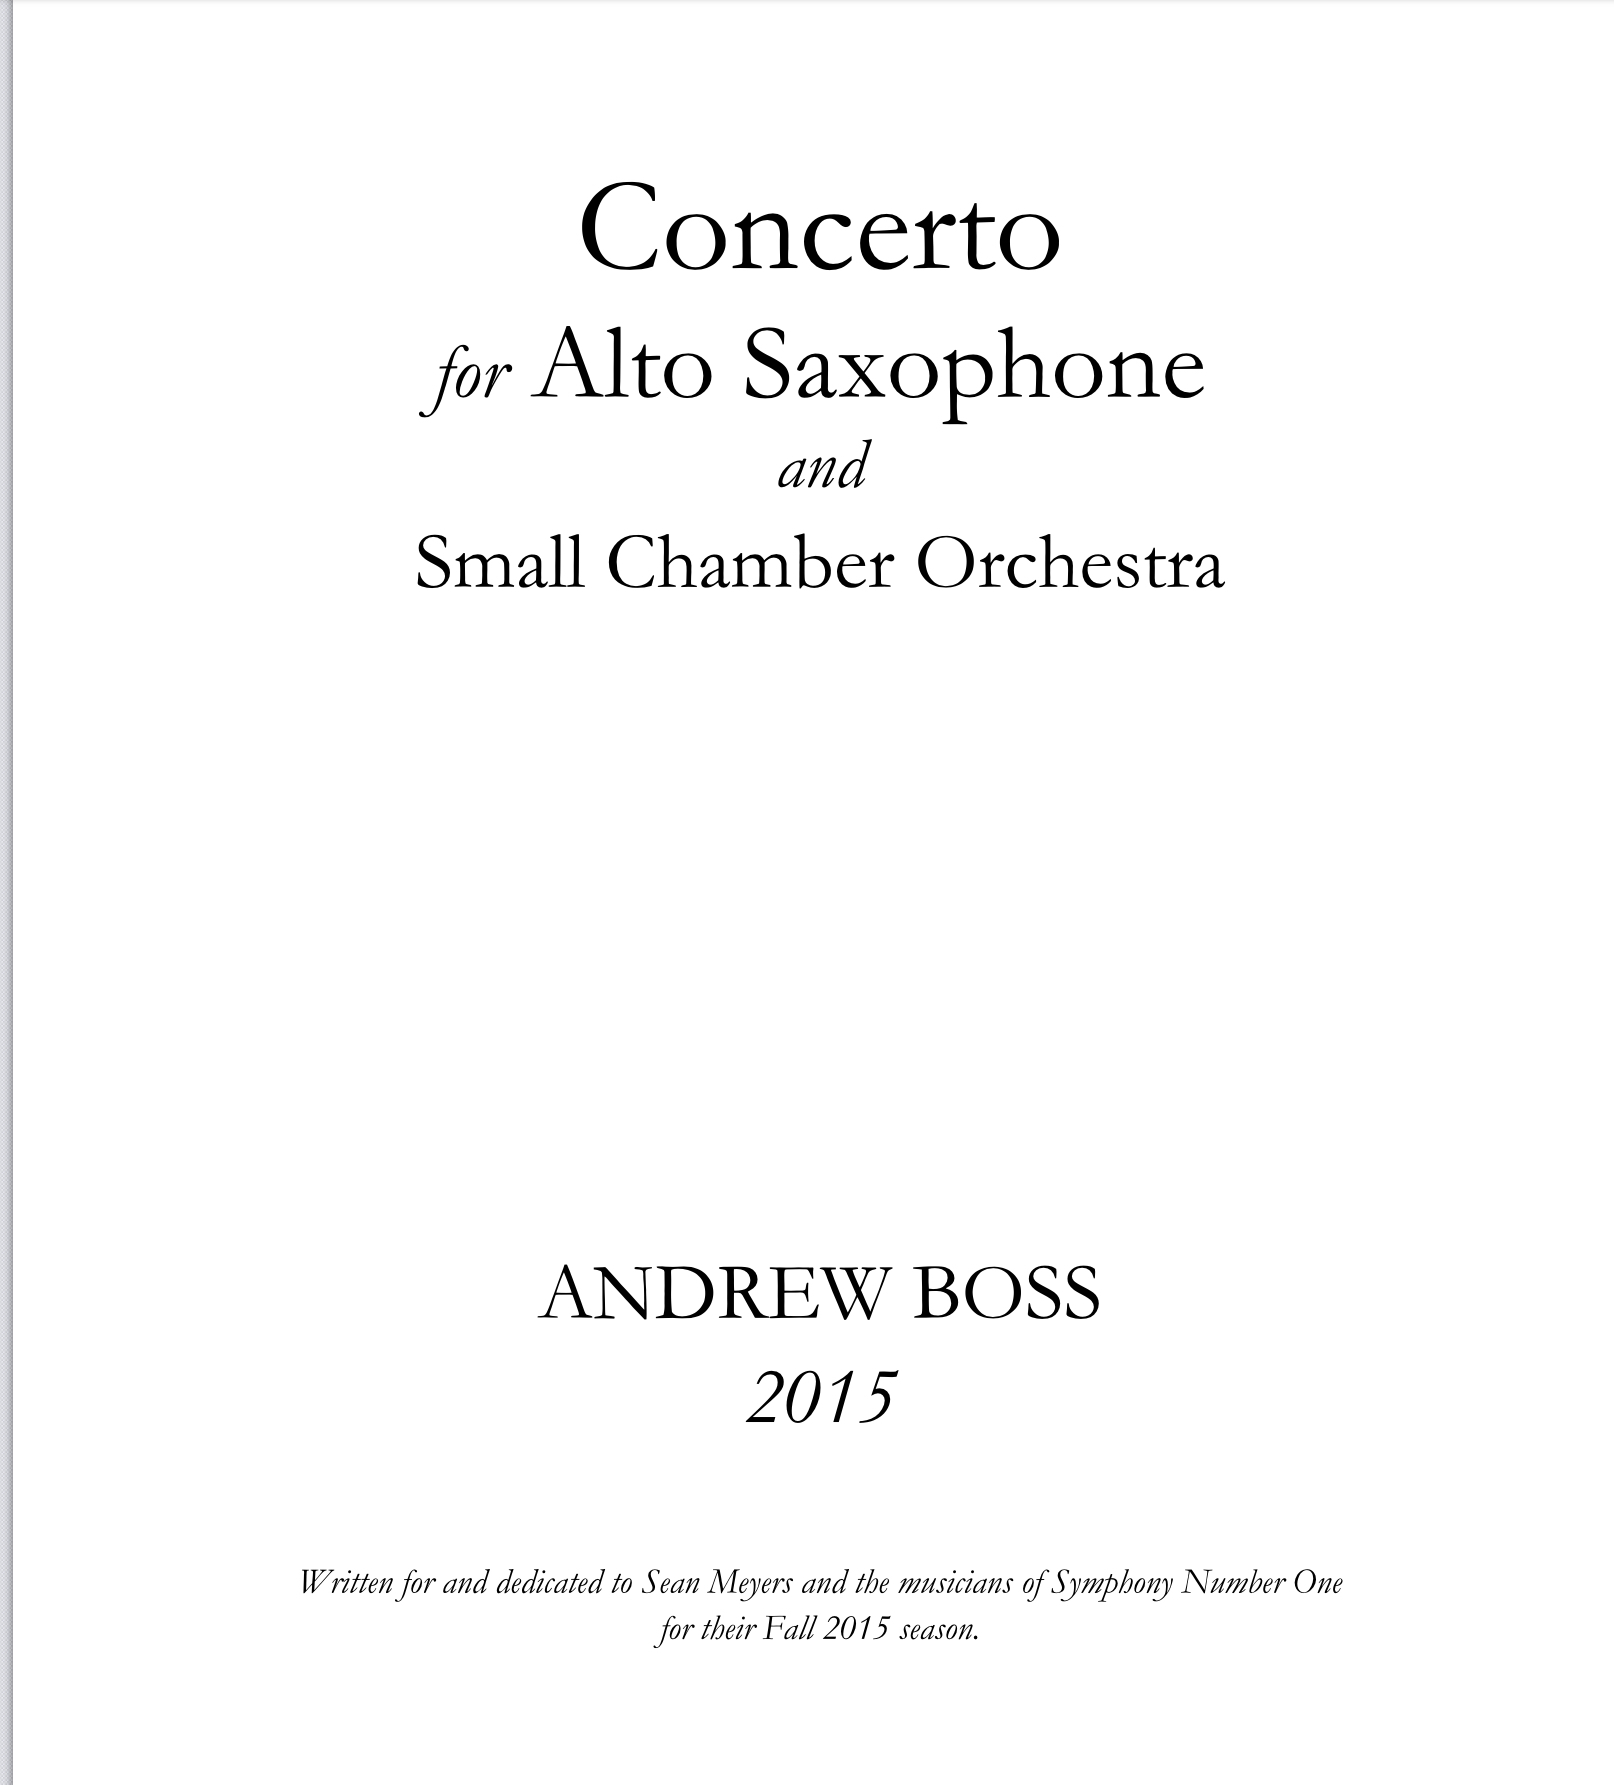 Concerto For Alto Saxophone And Chamber Orchestra  by Andrew Boss